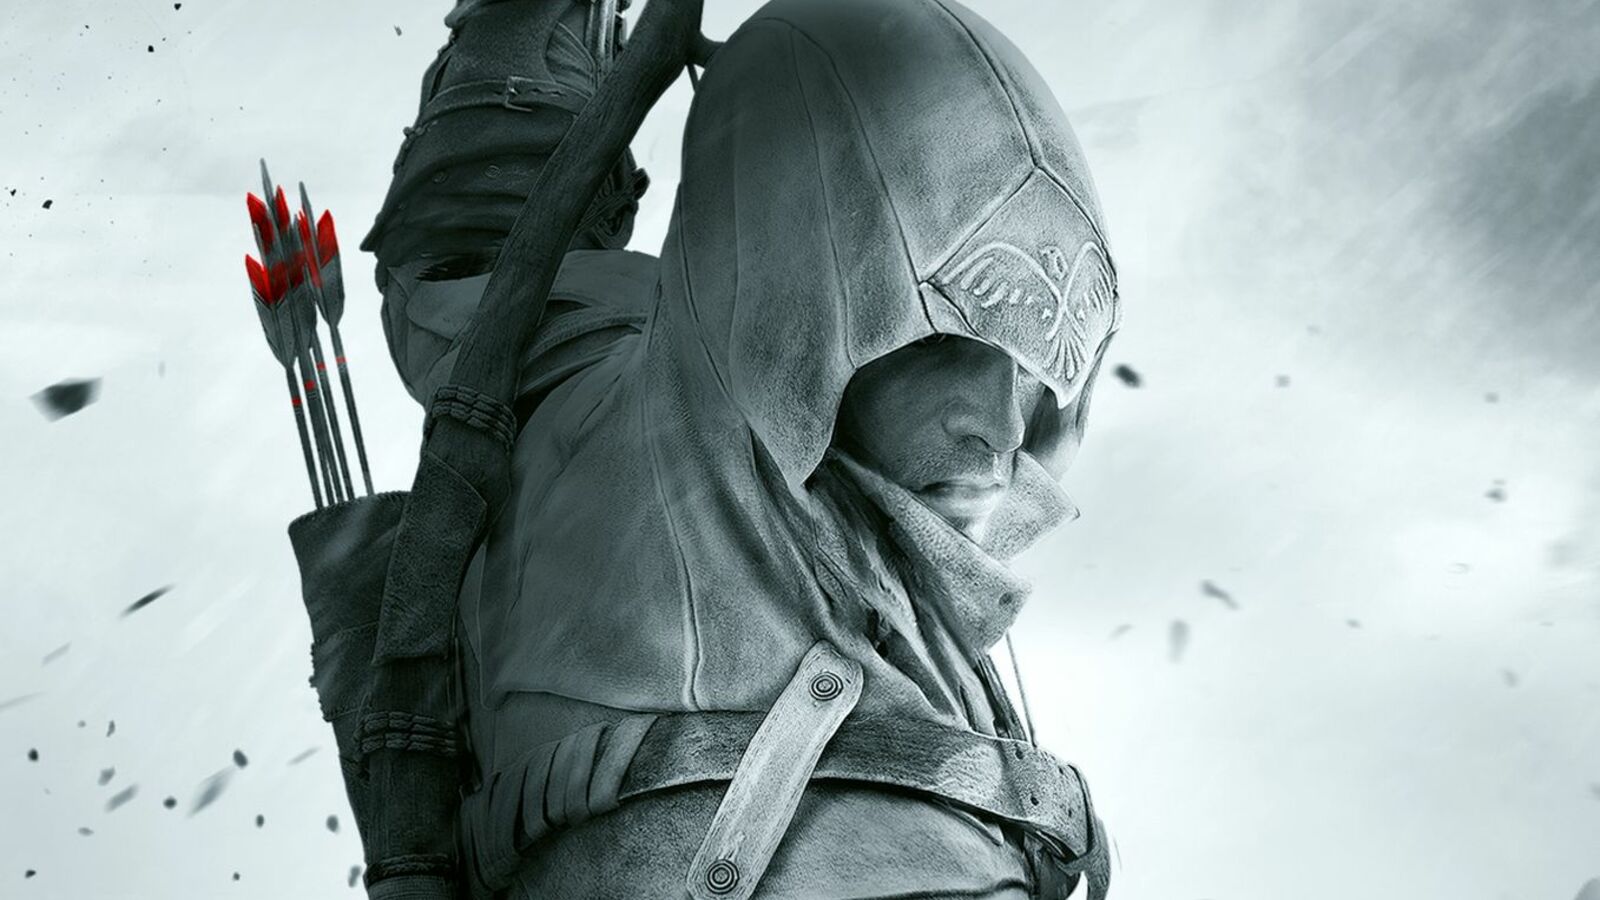 Assassin's Creed 3 Remastered and recommended PC specs